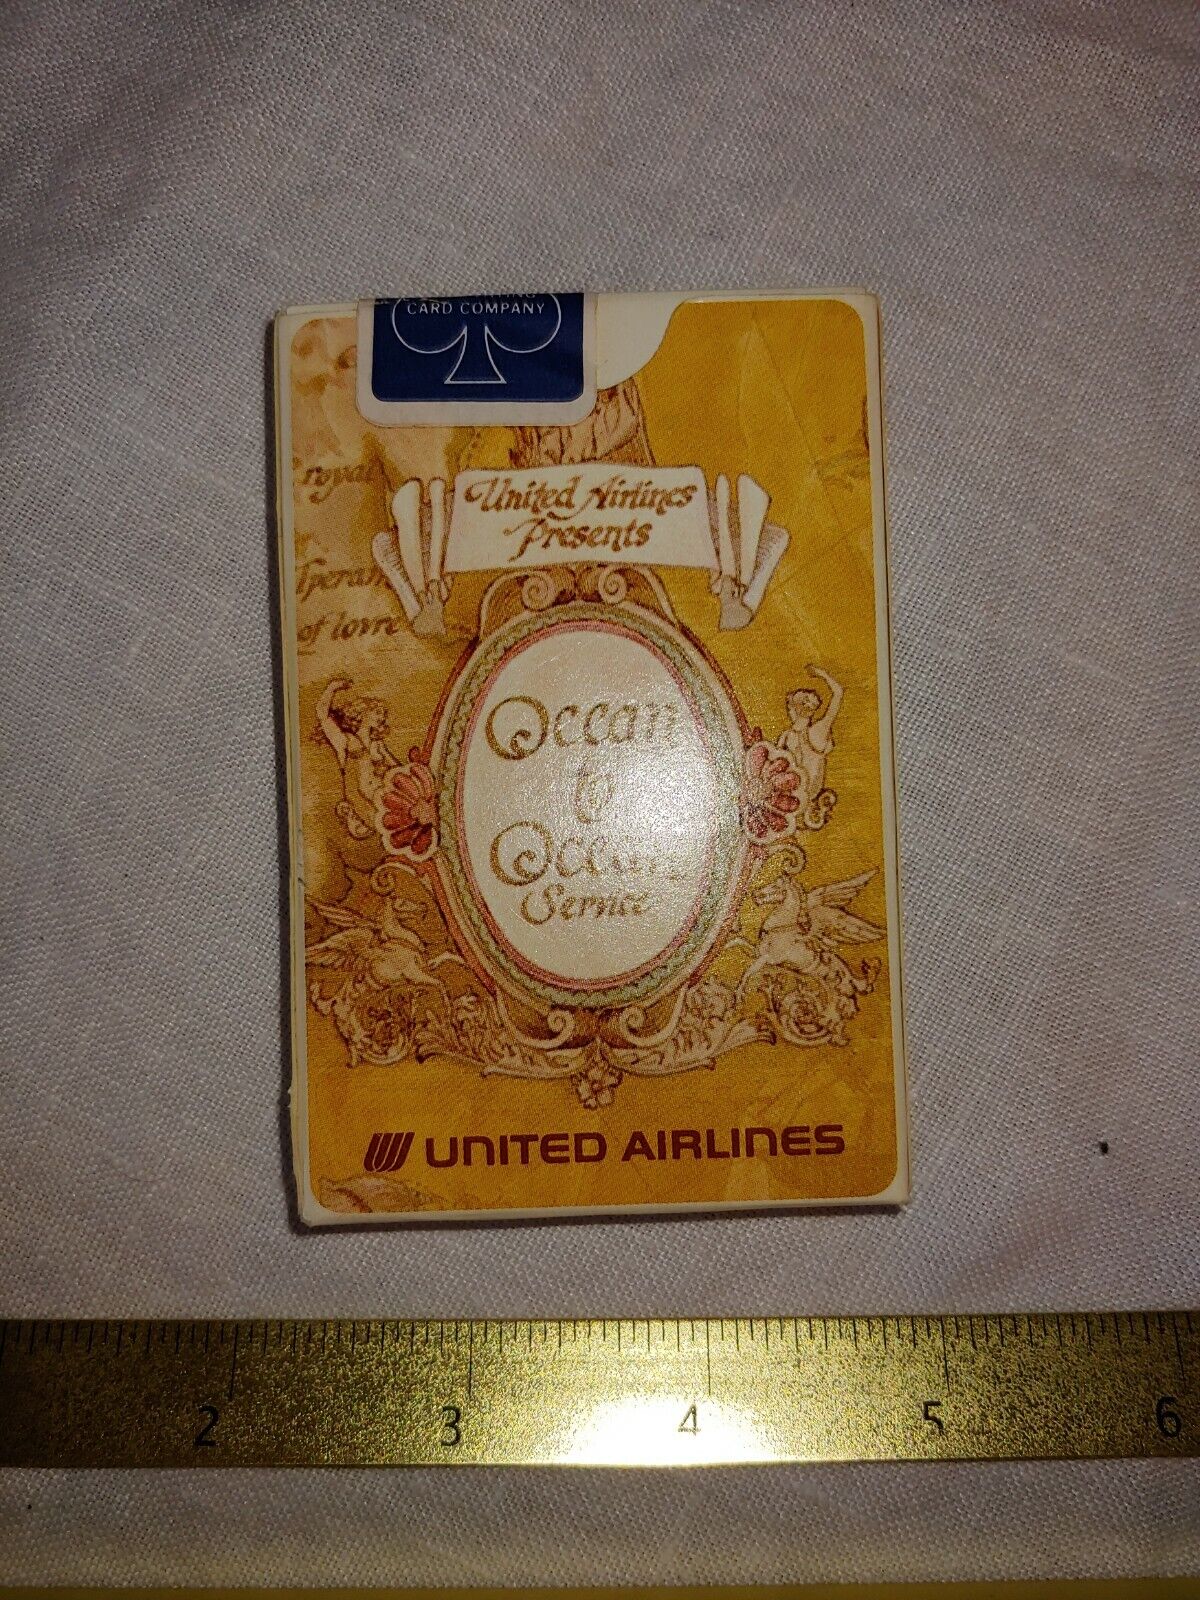 Vintage New Deadstock United Airlines Ocean Service Playing Cards Deck 1970s